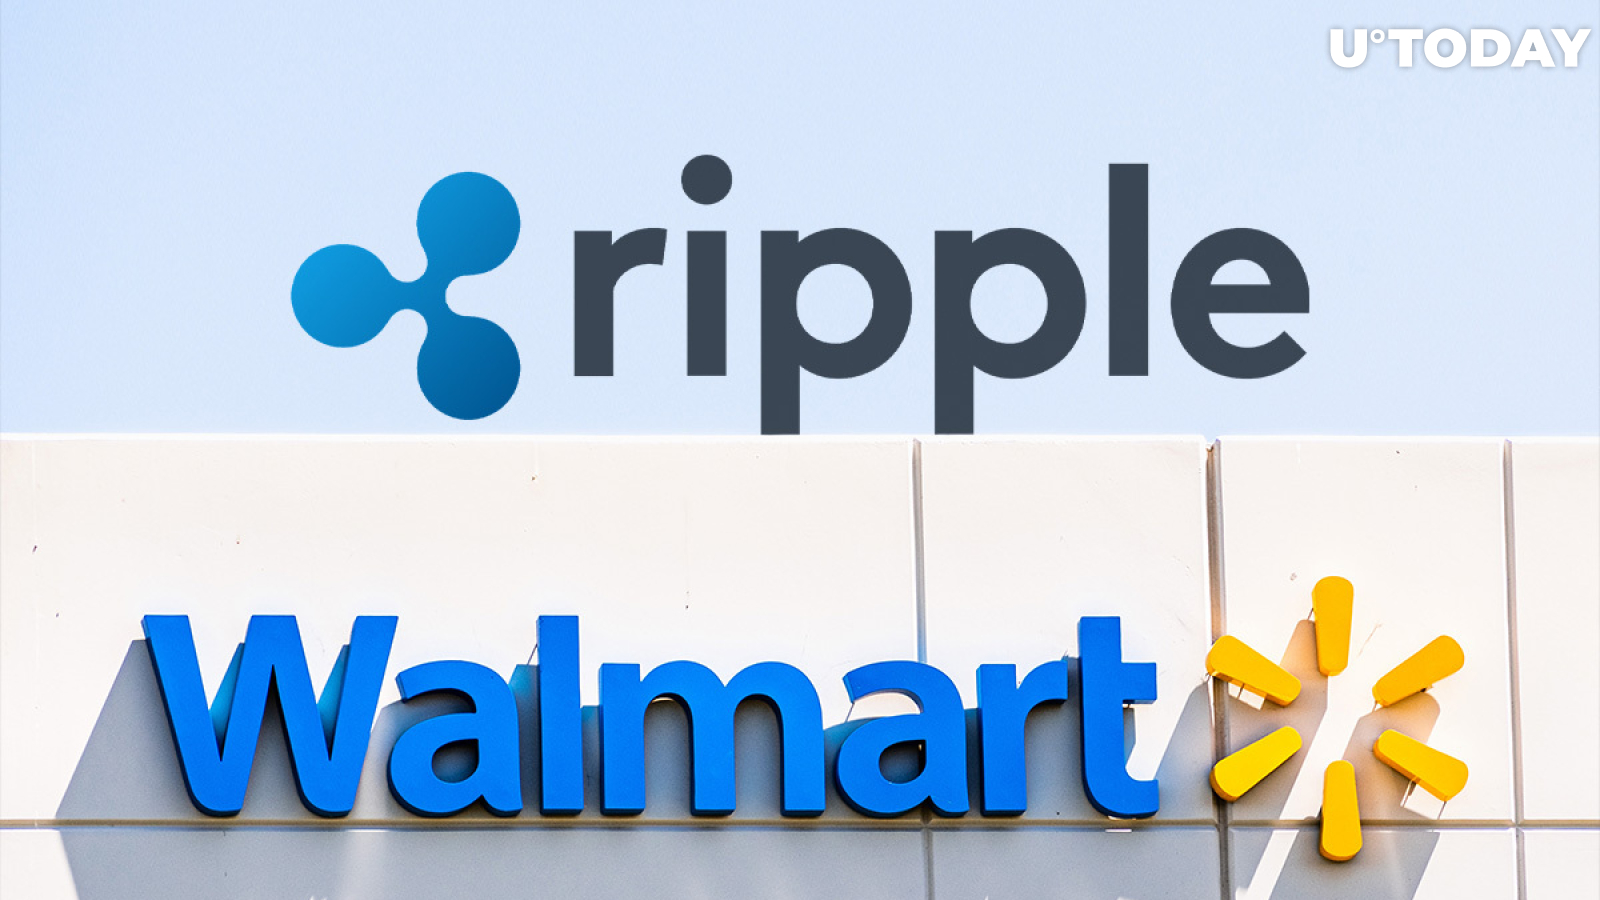 Walmart and Key Ripple Partner Extend Their Relationship